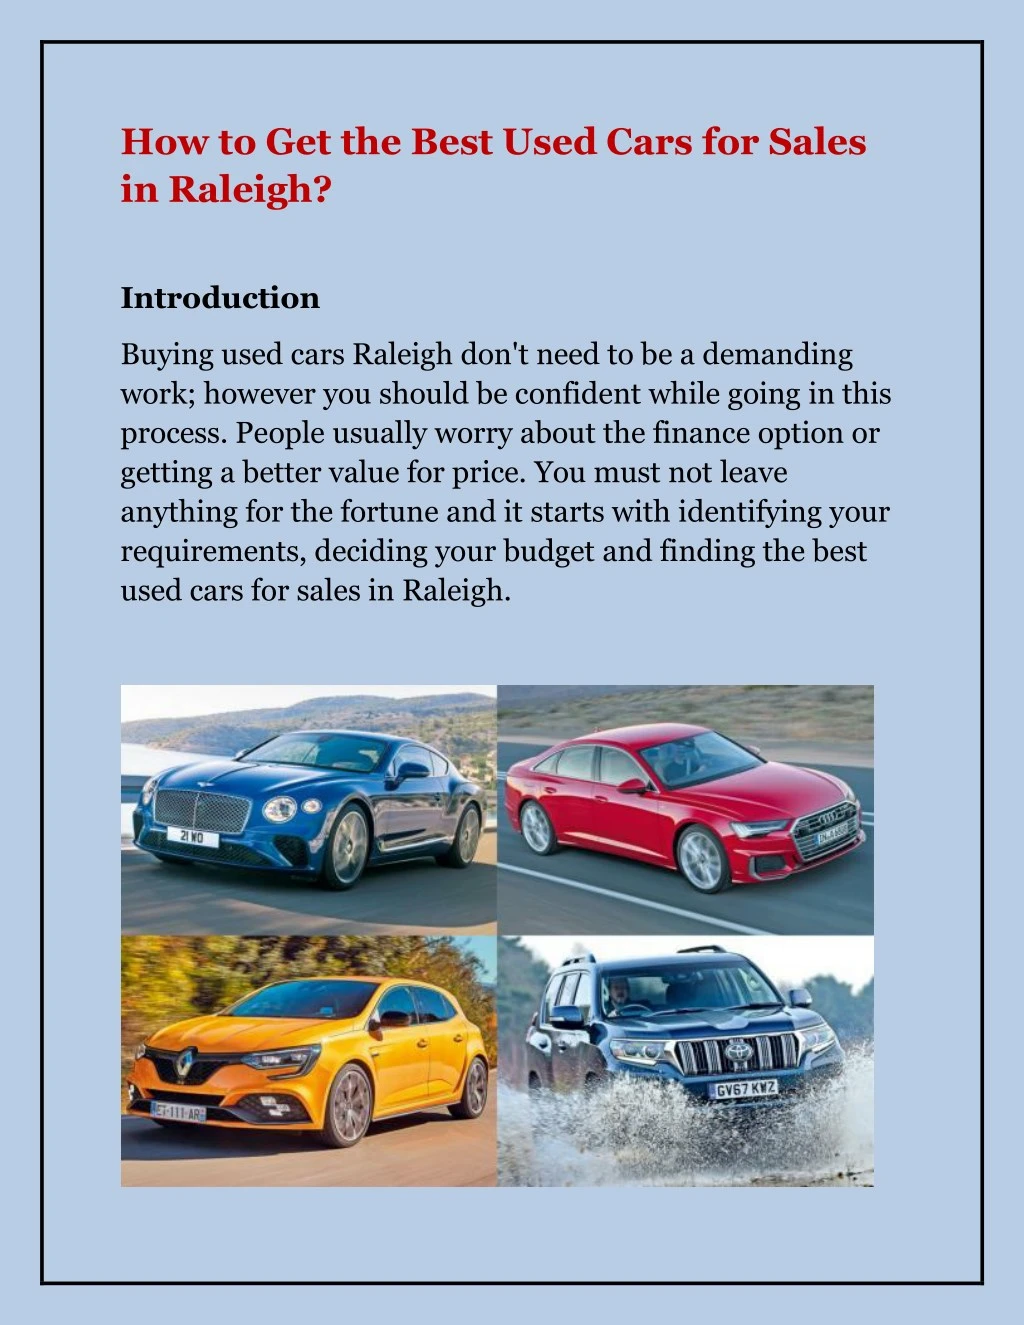 how to get the best used cars for sales in raleigh